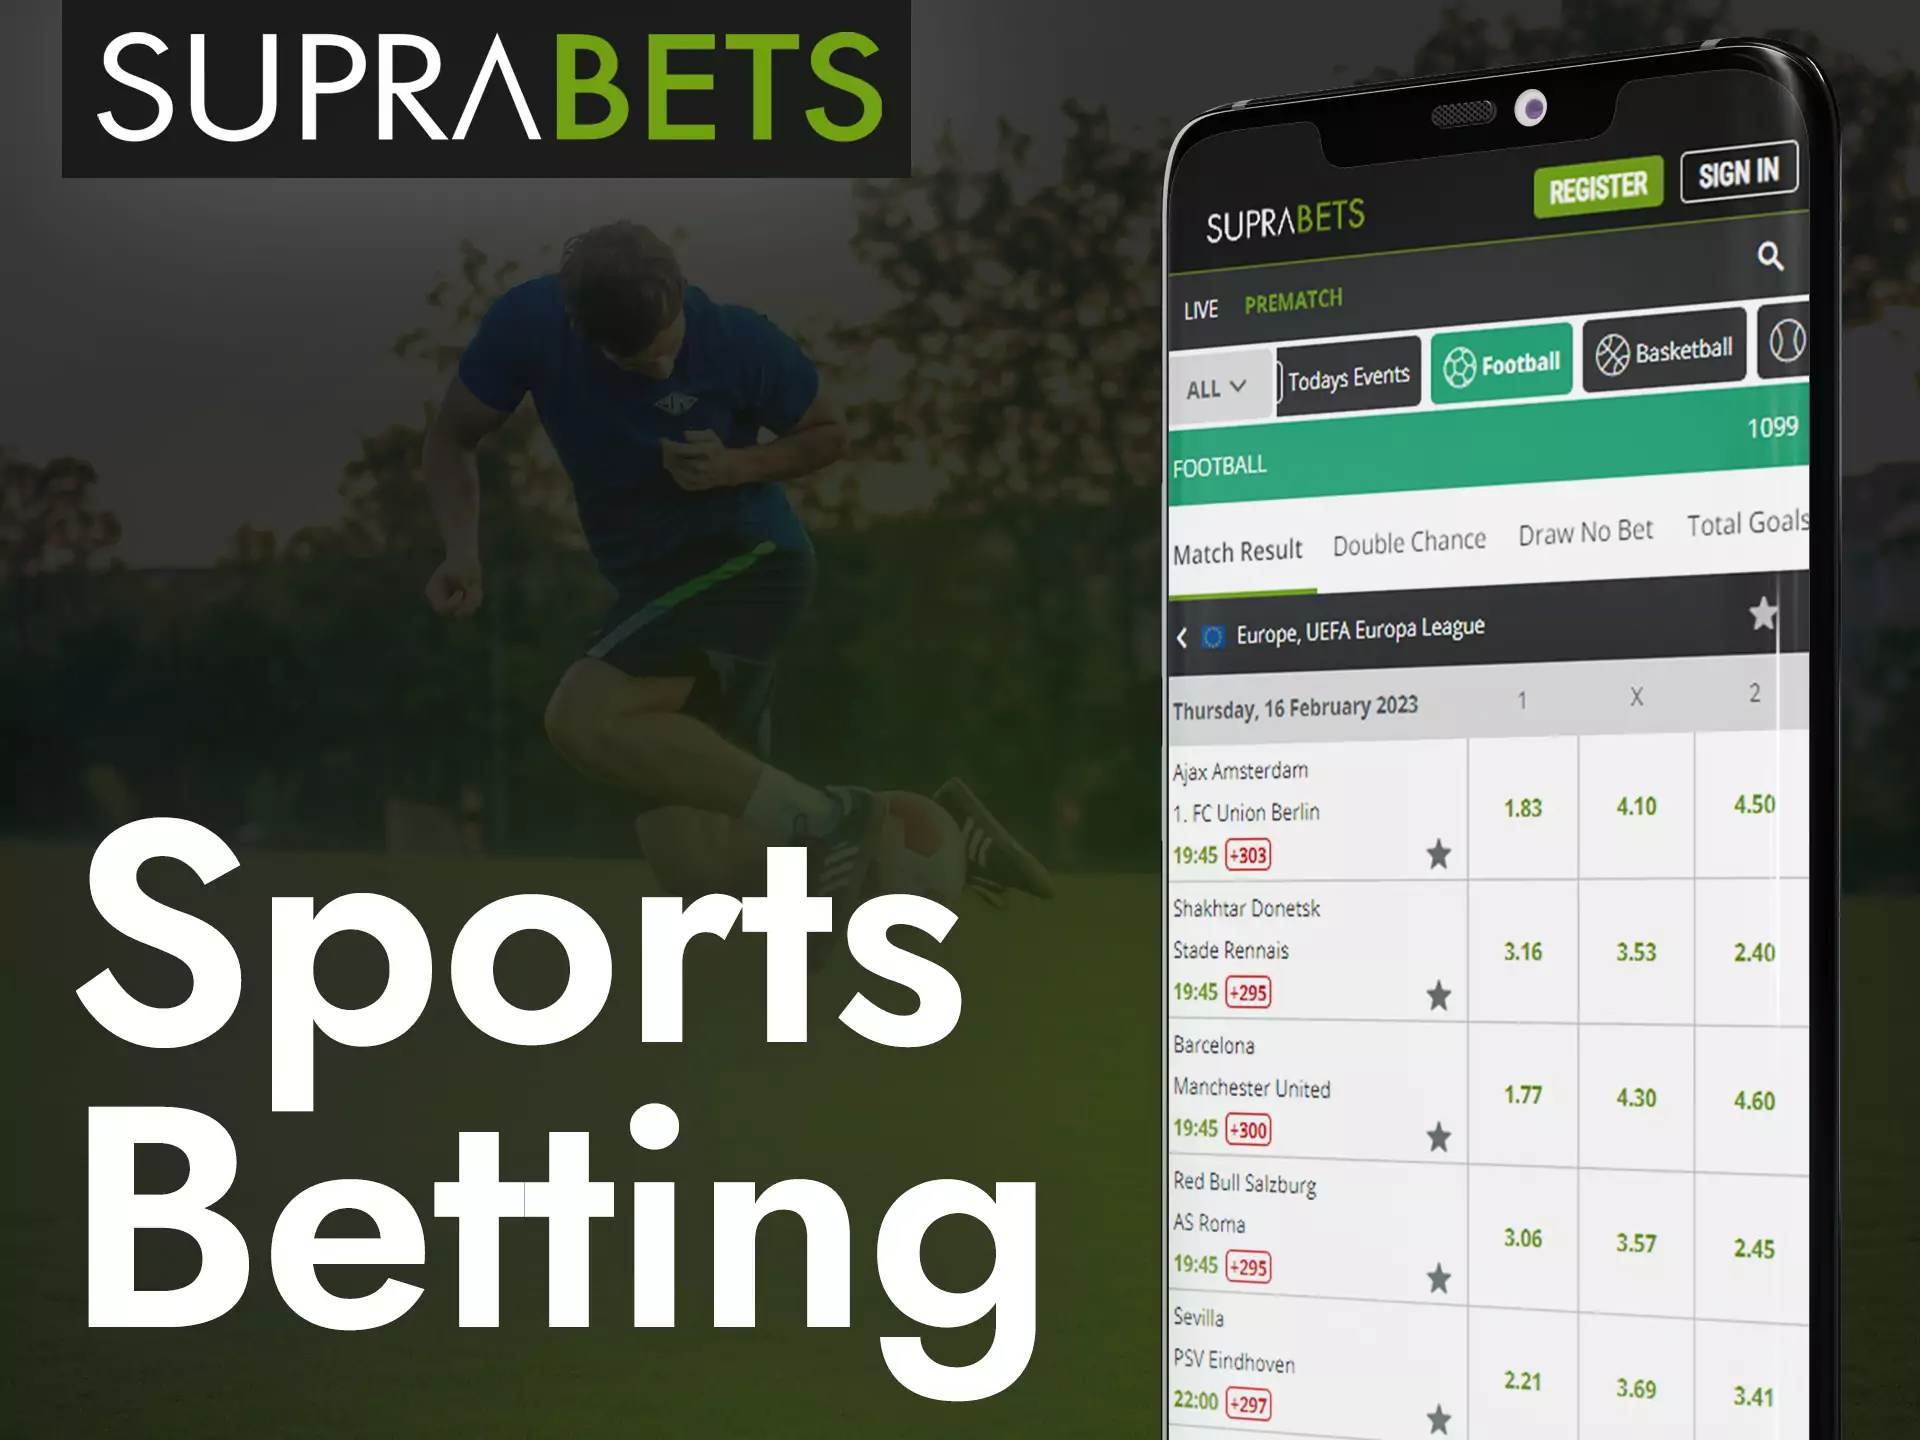 Place bets on any sporting events of different sports with Suprabets.